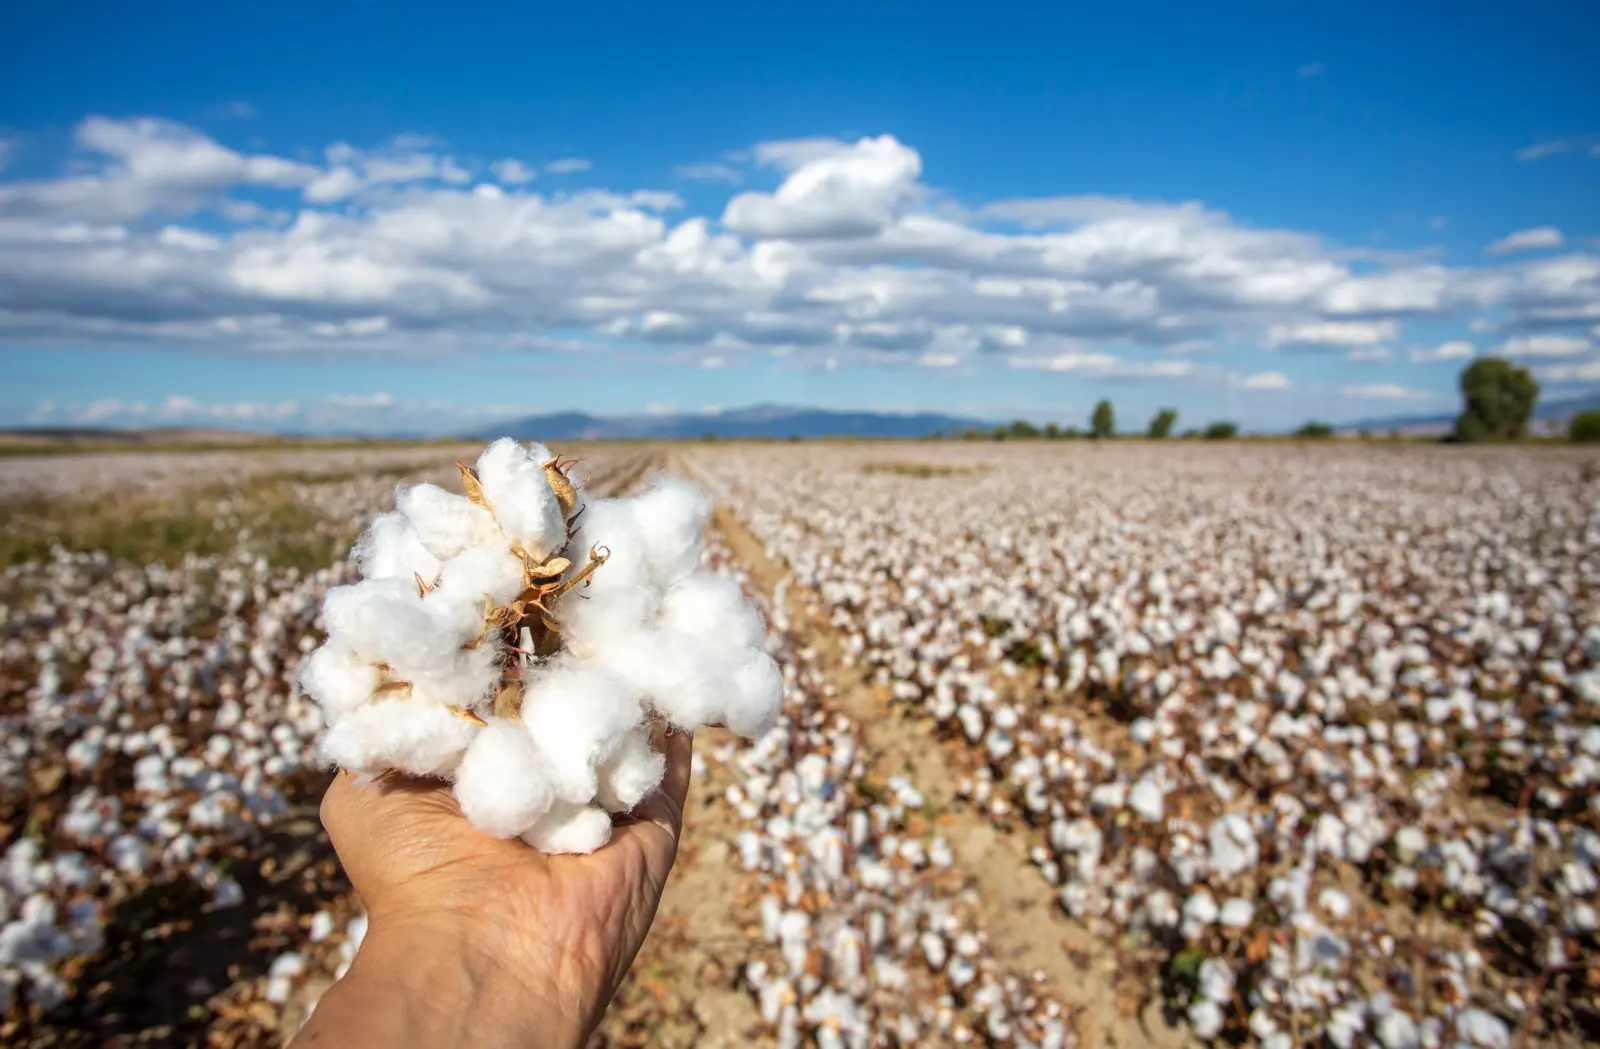 Fall in cotton prices continues, farmers are avoiding selling in anticipation of price rise